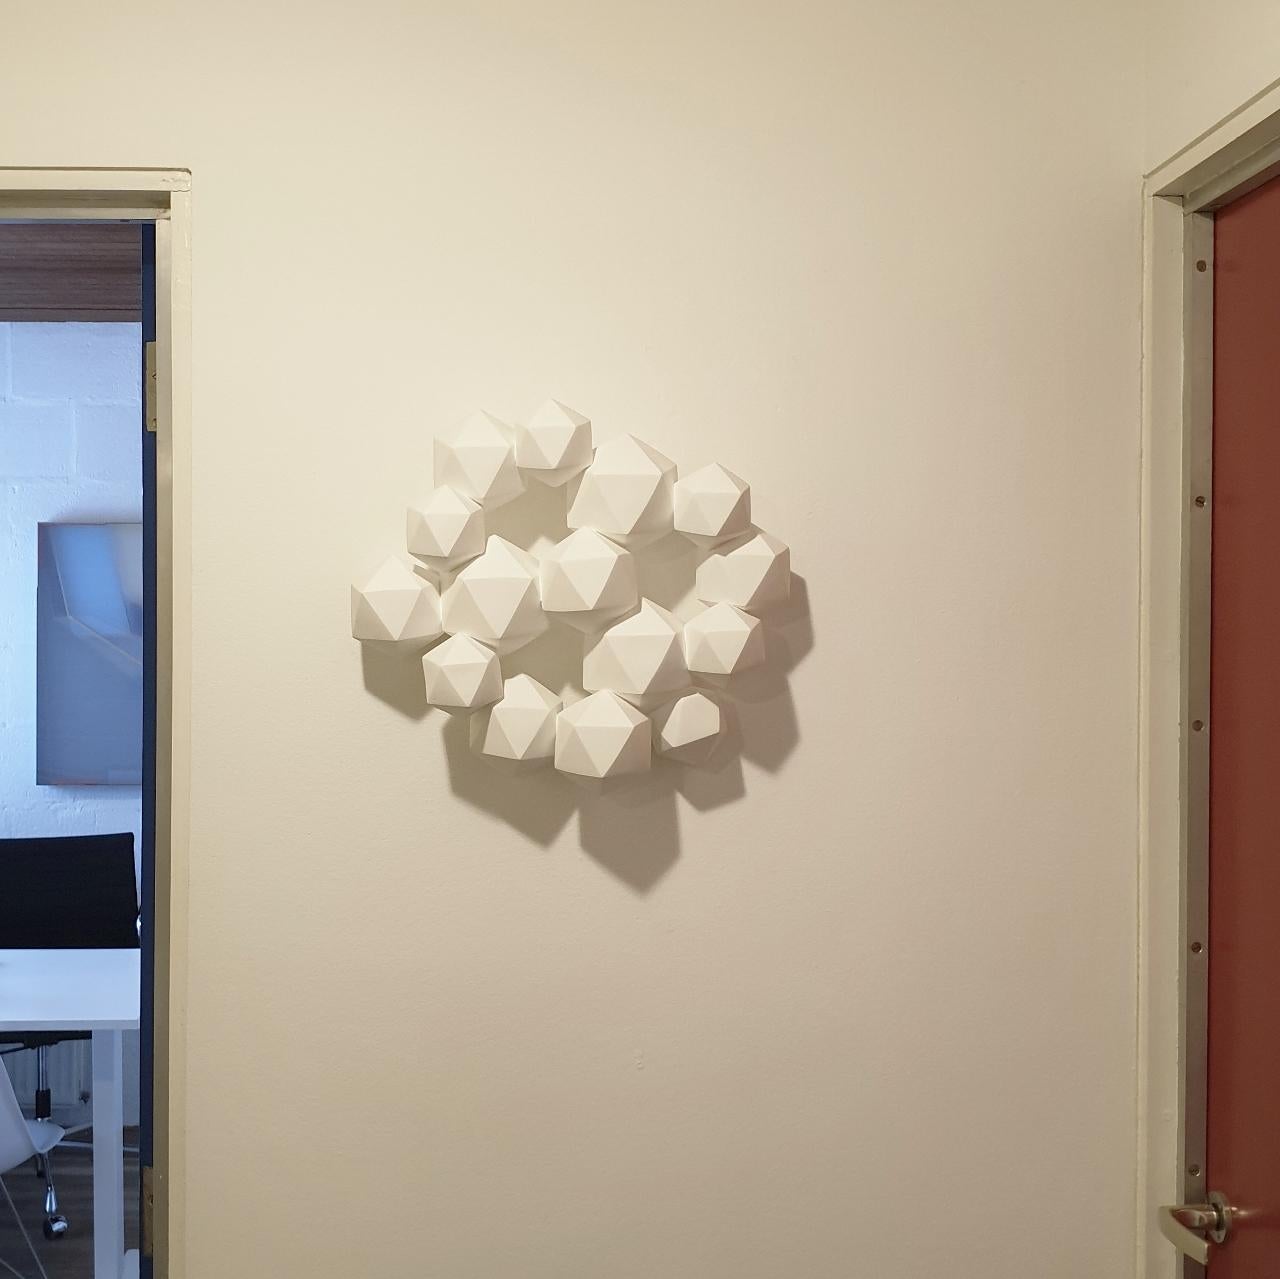 Halfway - contemporary modern abstract geometric ceramic wall sculpture - Sculpture by Mo Cornelisse